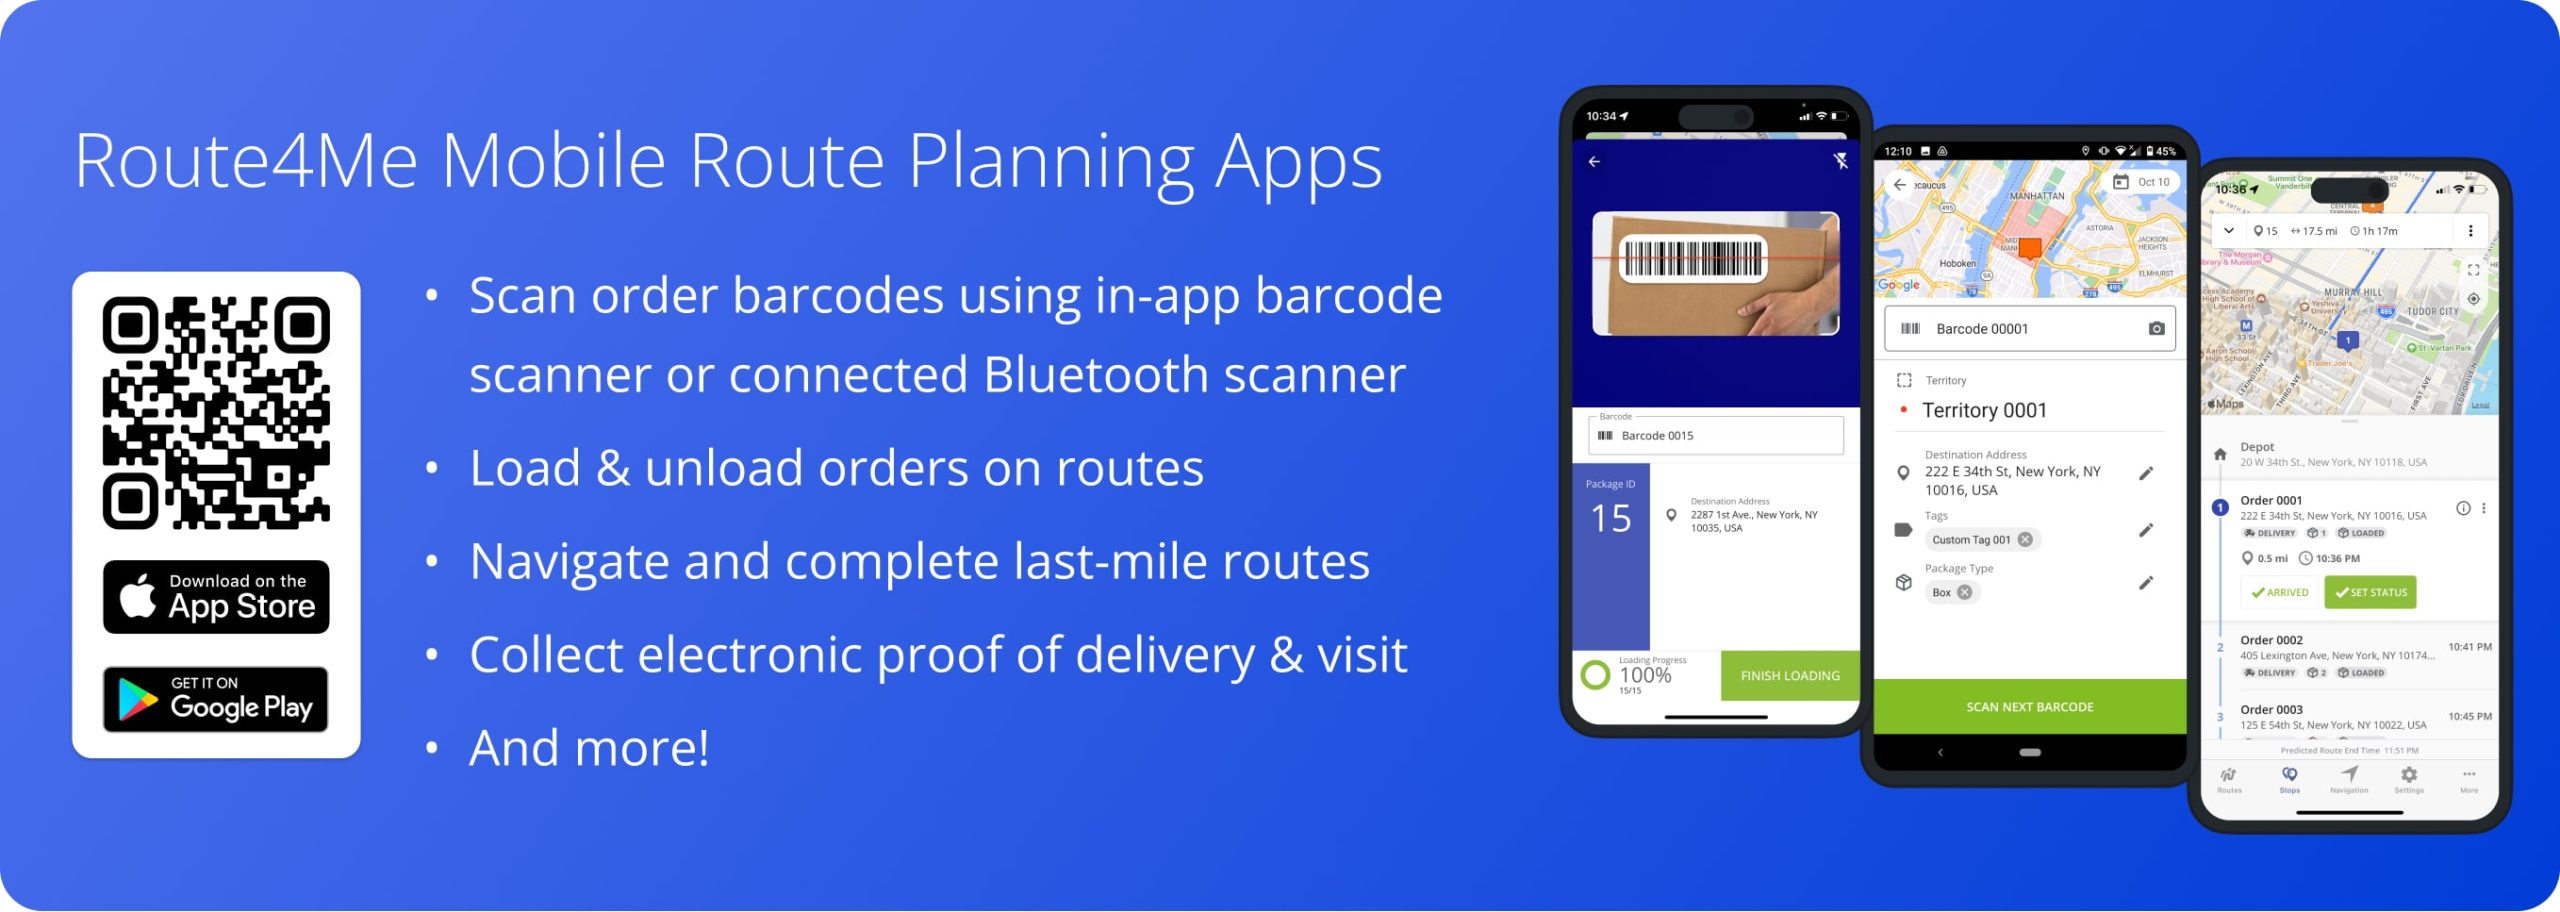 Download Route4Me's mobile route planning apps for scanning order barcodes, navigating routes, unloading orders, etc.